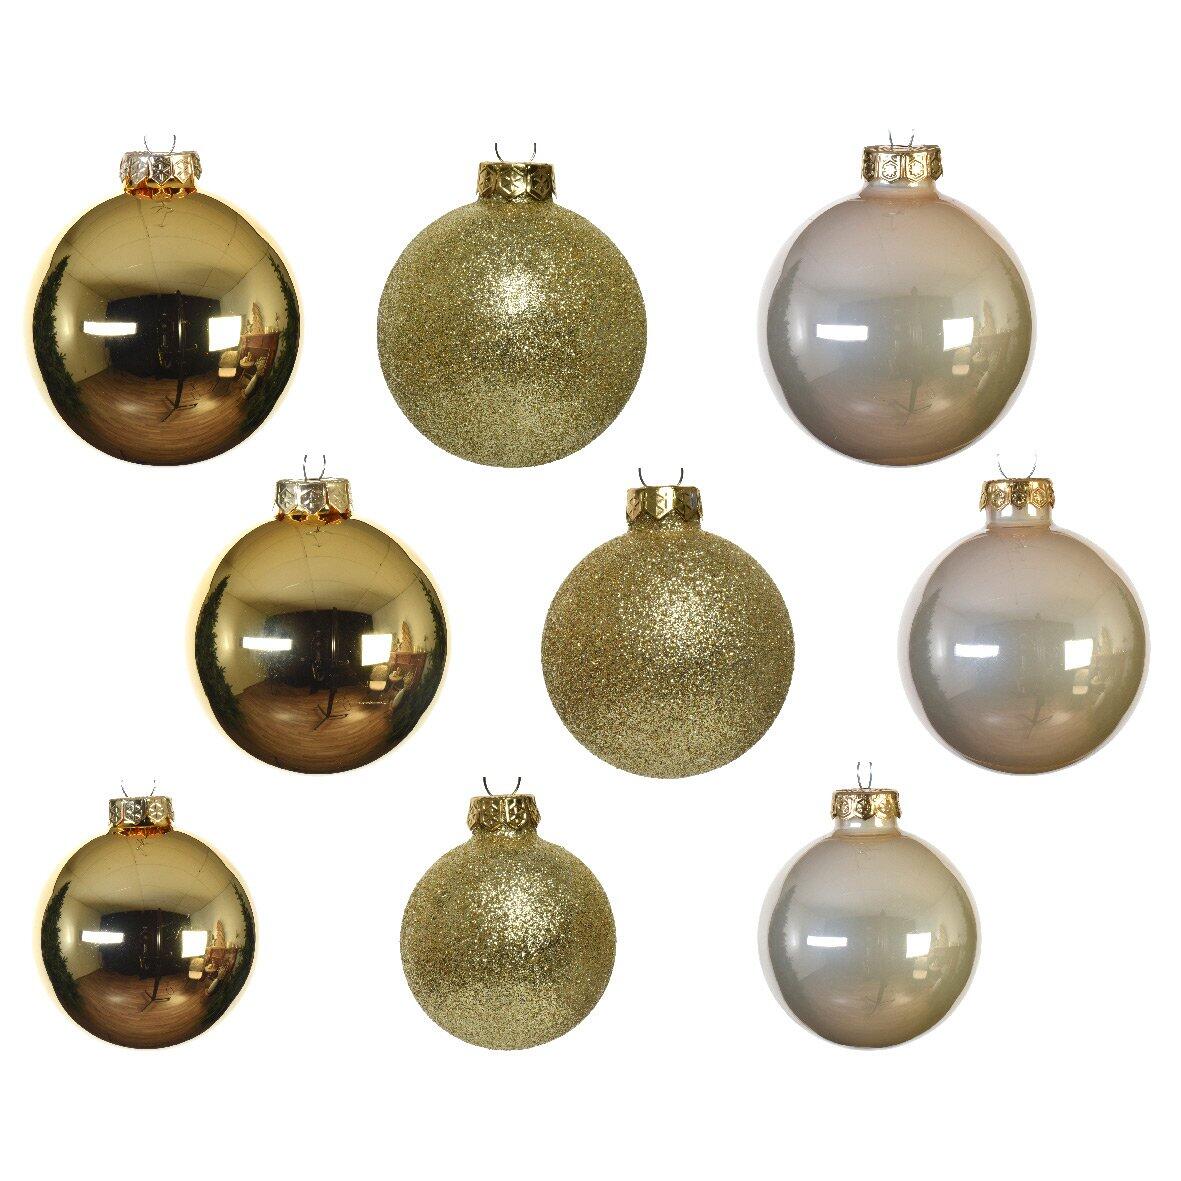 Lot de 42 boules de Noël en verre (D70 mm) (D60 mm) (D50 mm) Domeona Perle / Or  1